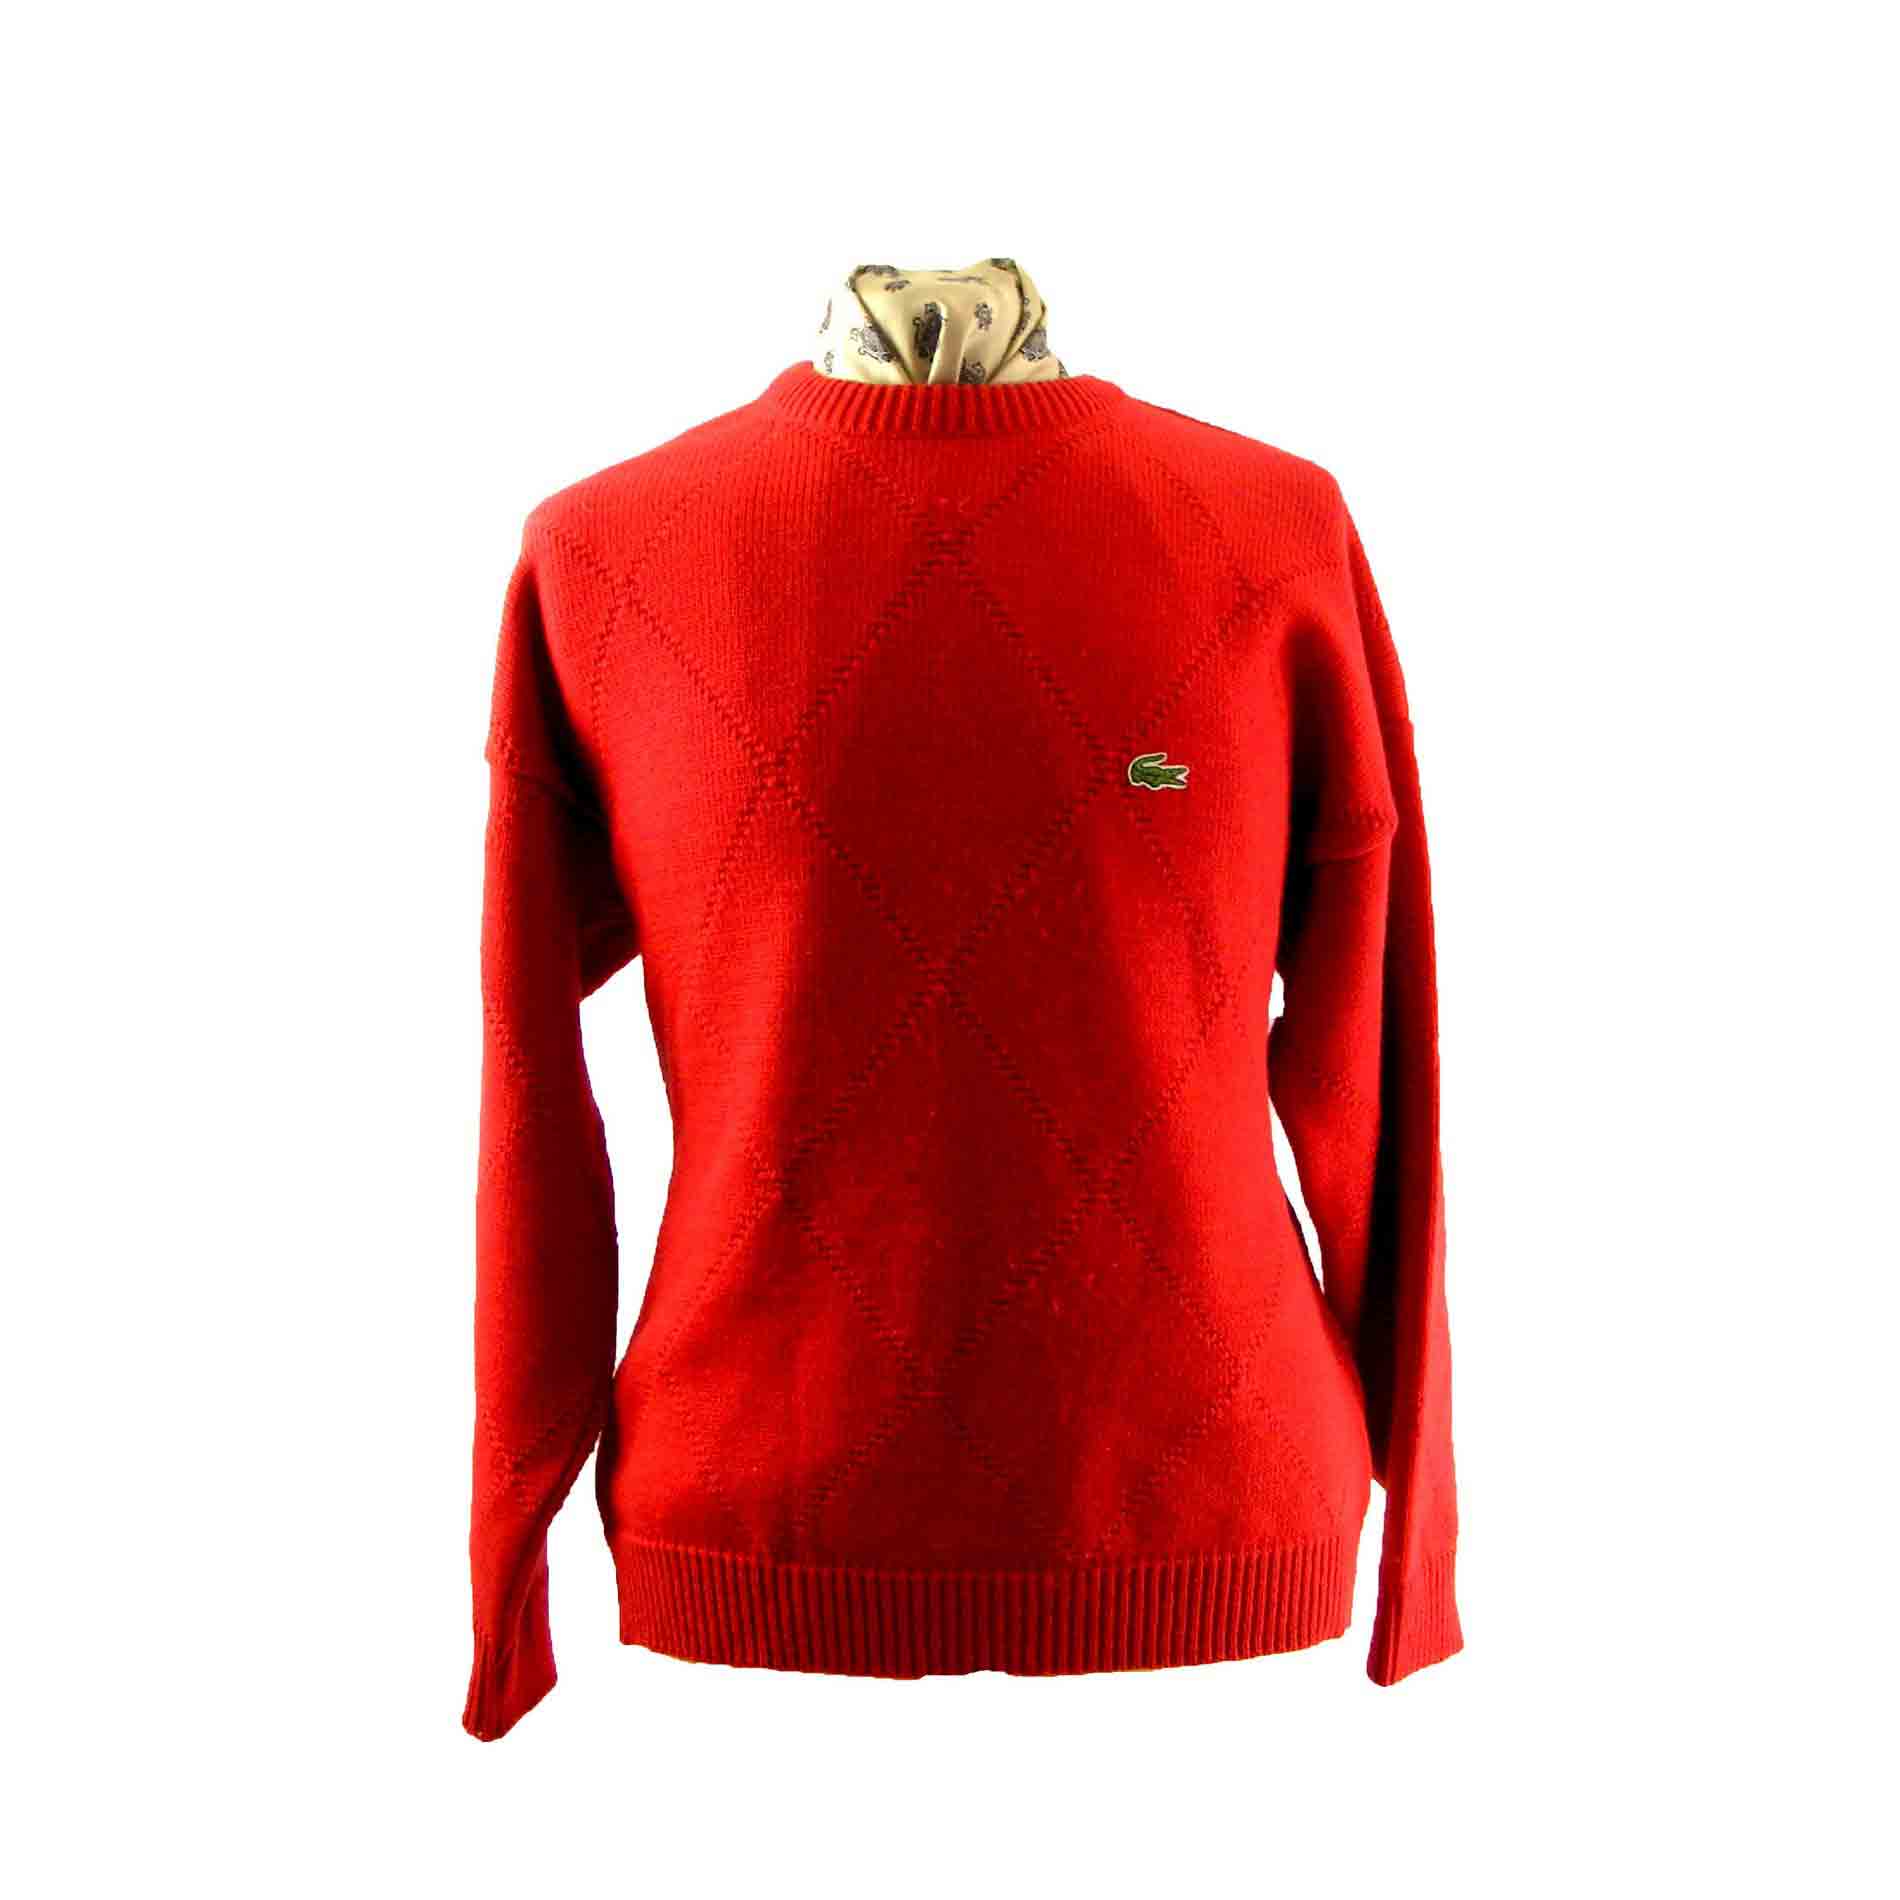 Red crew neck Lacoste sweater - Blue 17 Vintage Clothing